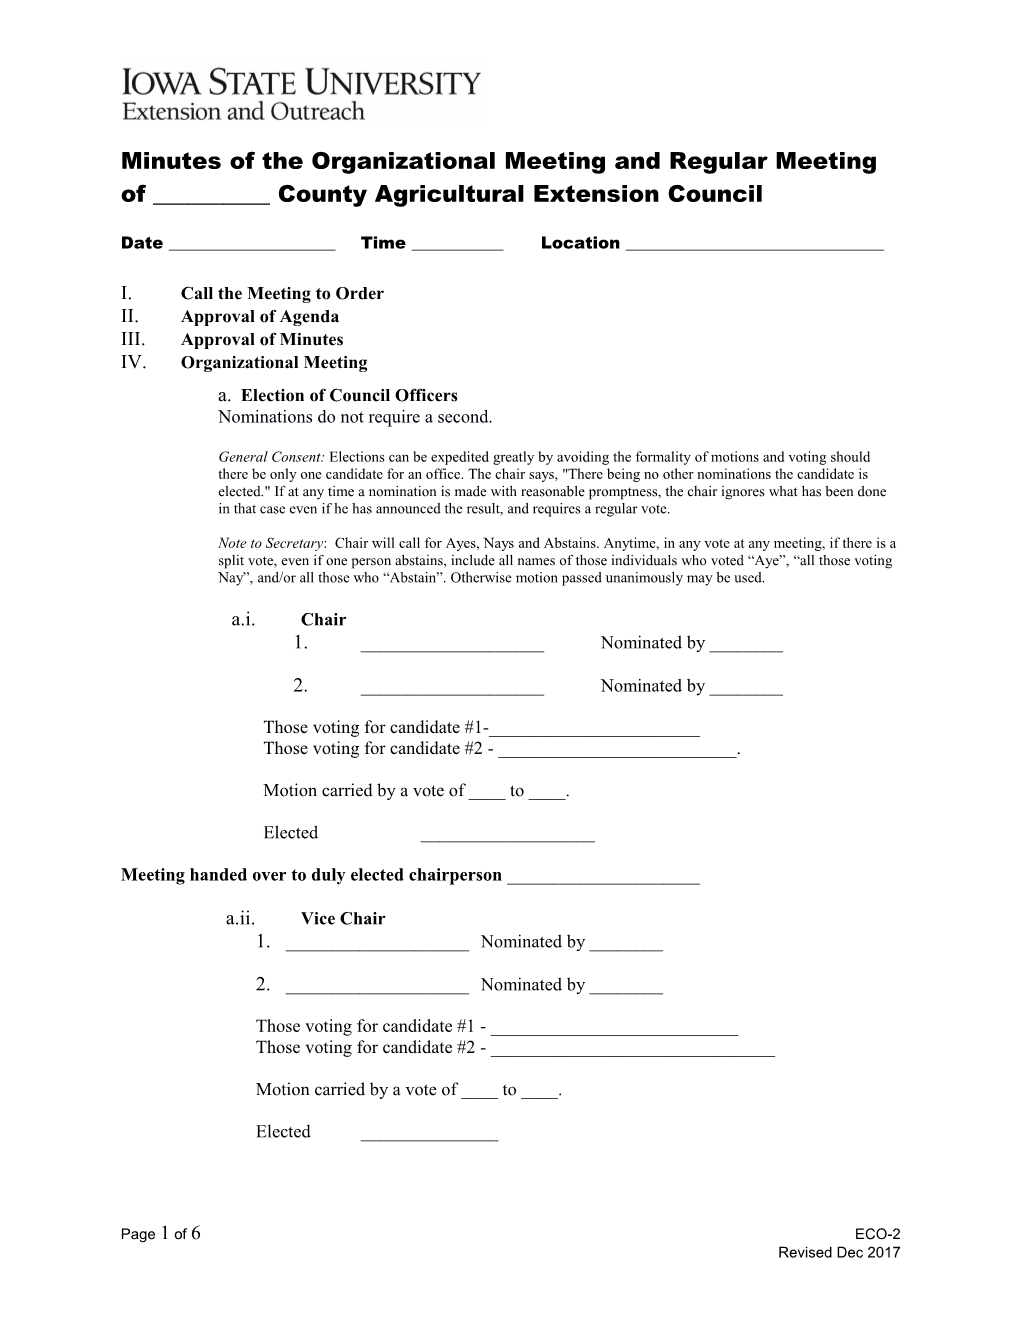 Minutes of the Organizational Meeting and Regular Meeting of ______County Agricultural